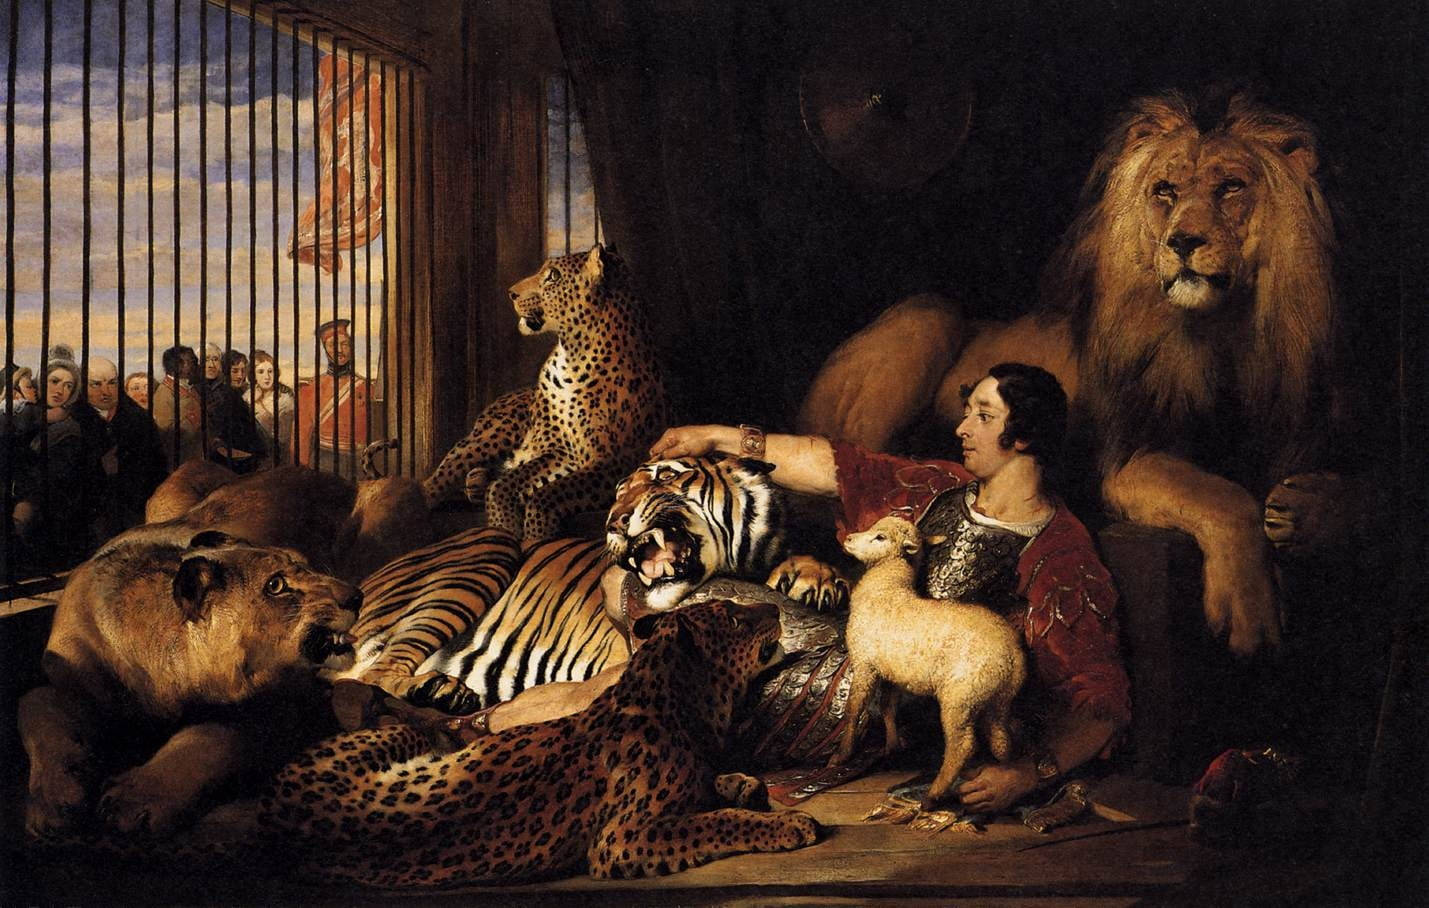 Caged Lion And Tiger Group Painting Wallpaper